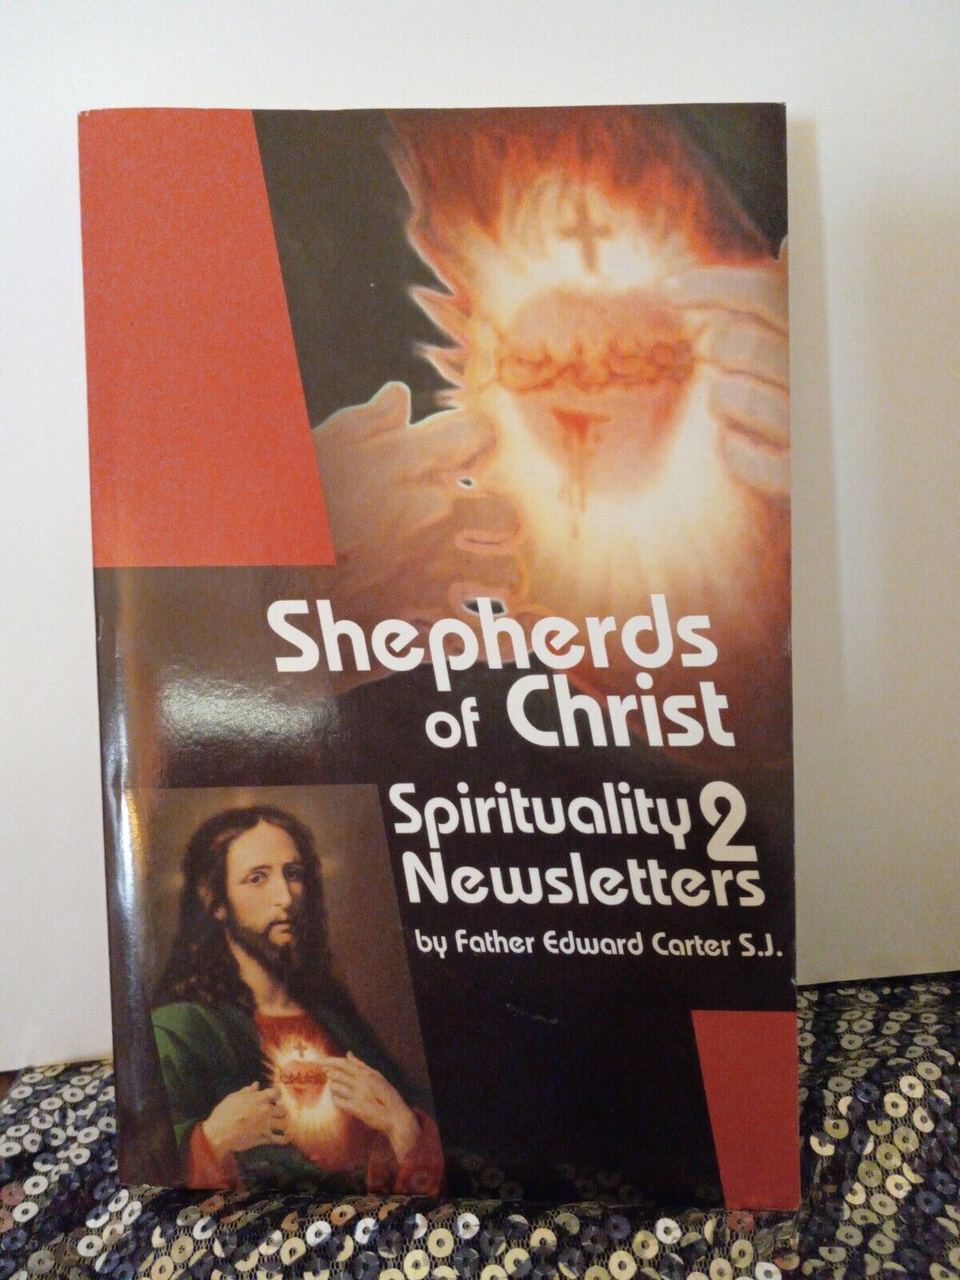 Shepherds of Christ Spirituality 2 Newsletters by Father Edward Carter S. J.